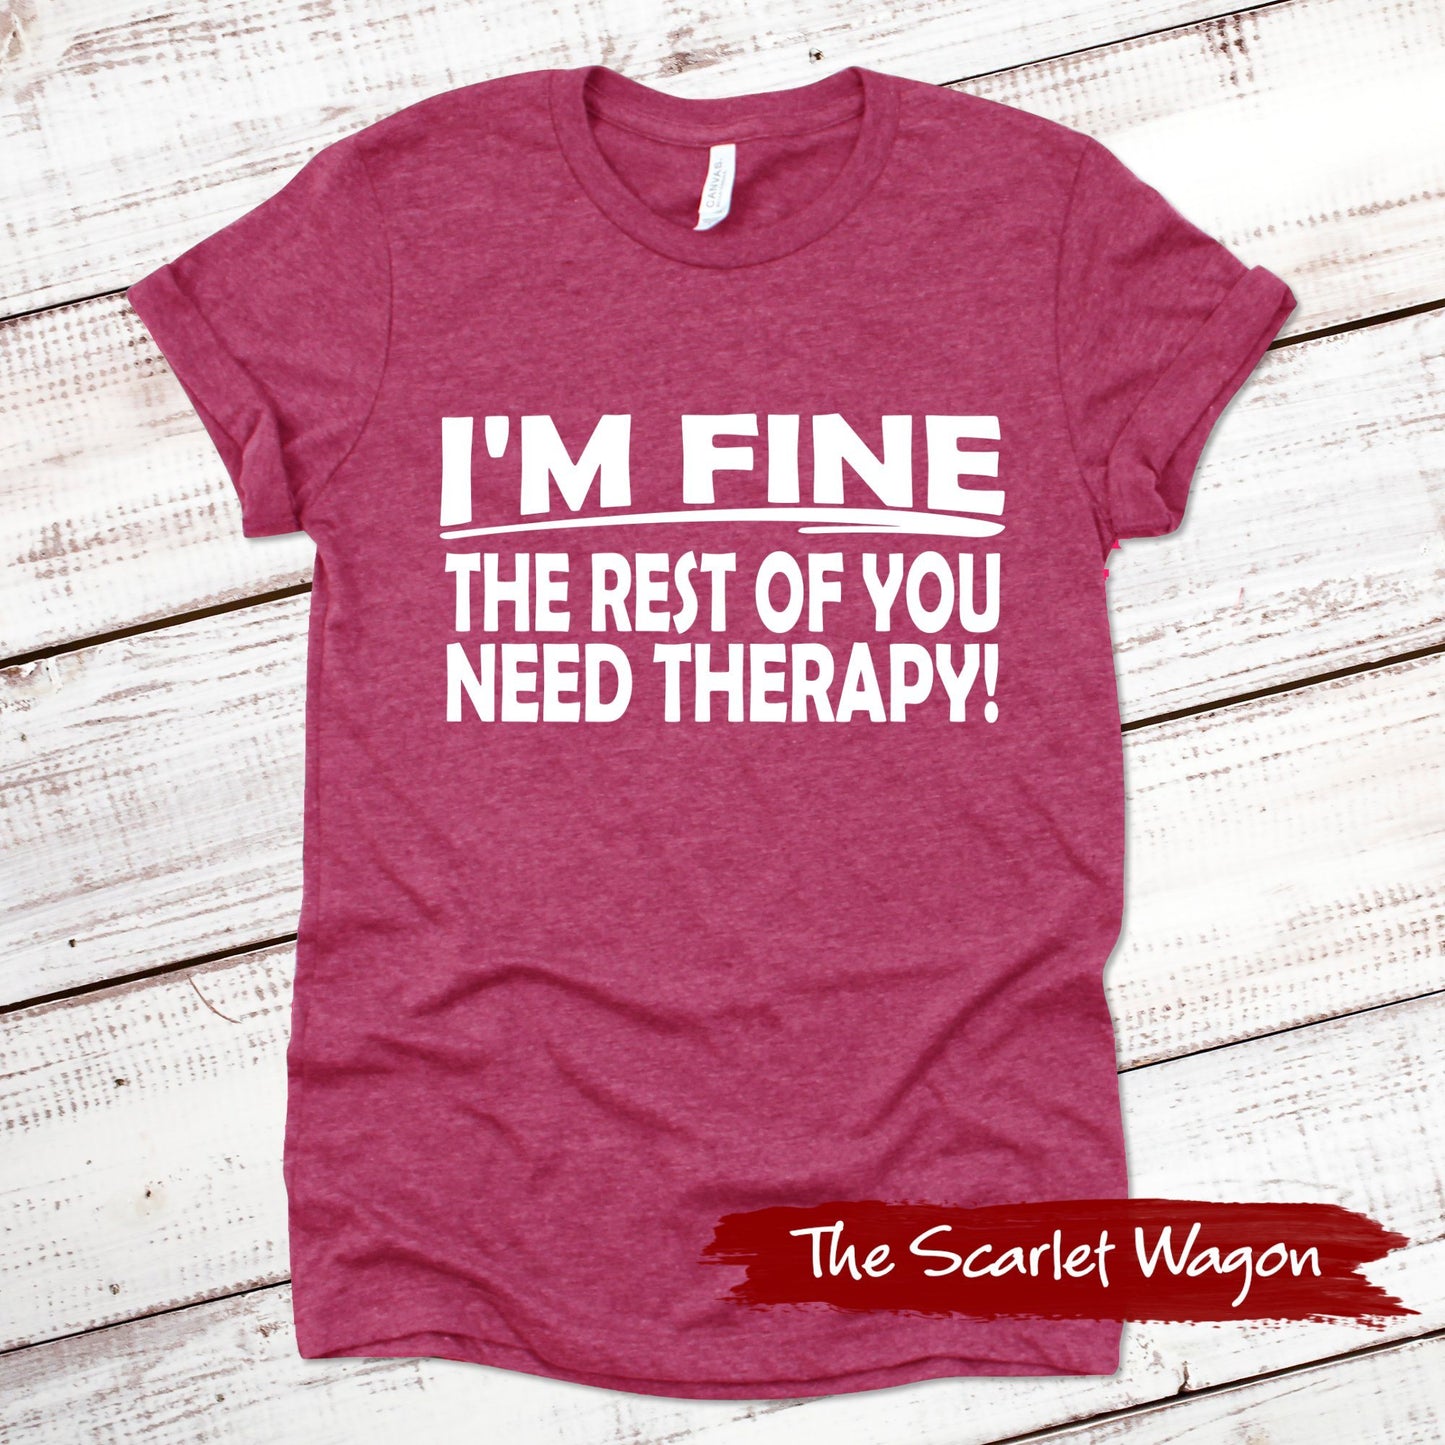 I'm Fine the Rest of You Need Therapy Funny Shirt Scarlet Wagon Heather Raspberry XS 